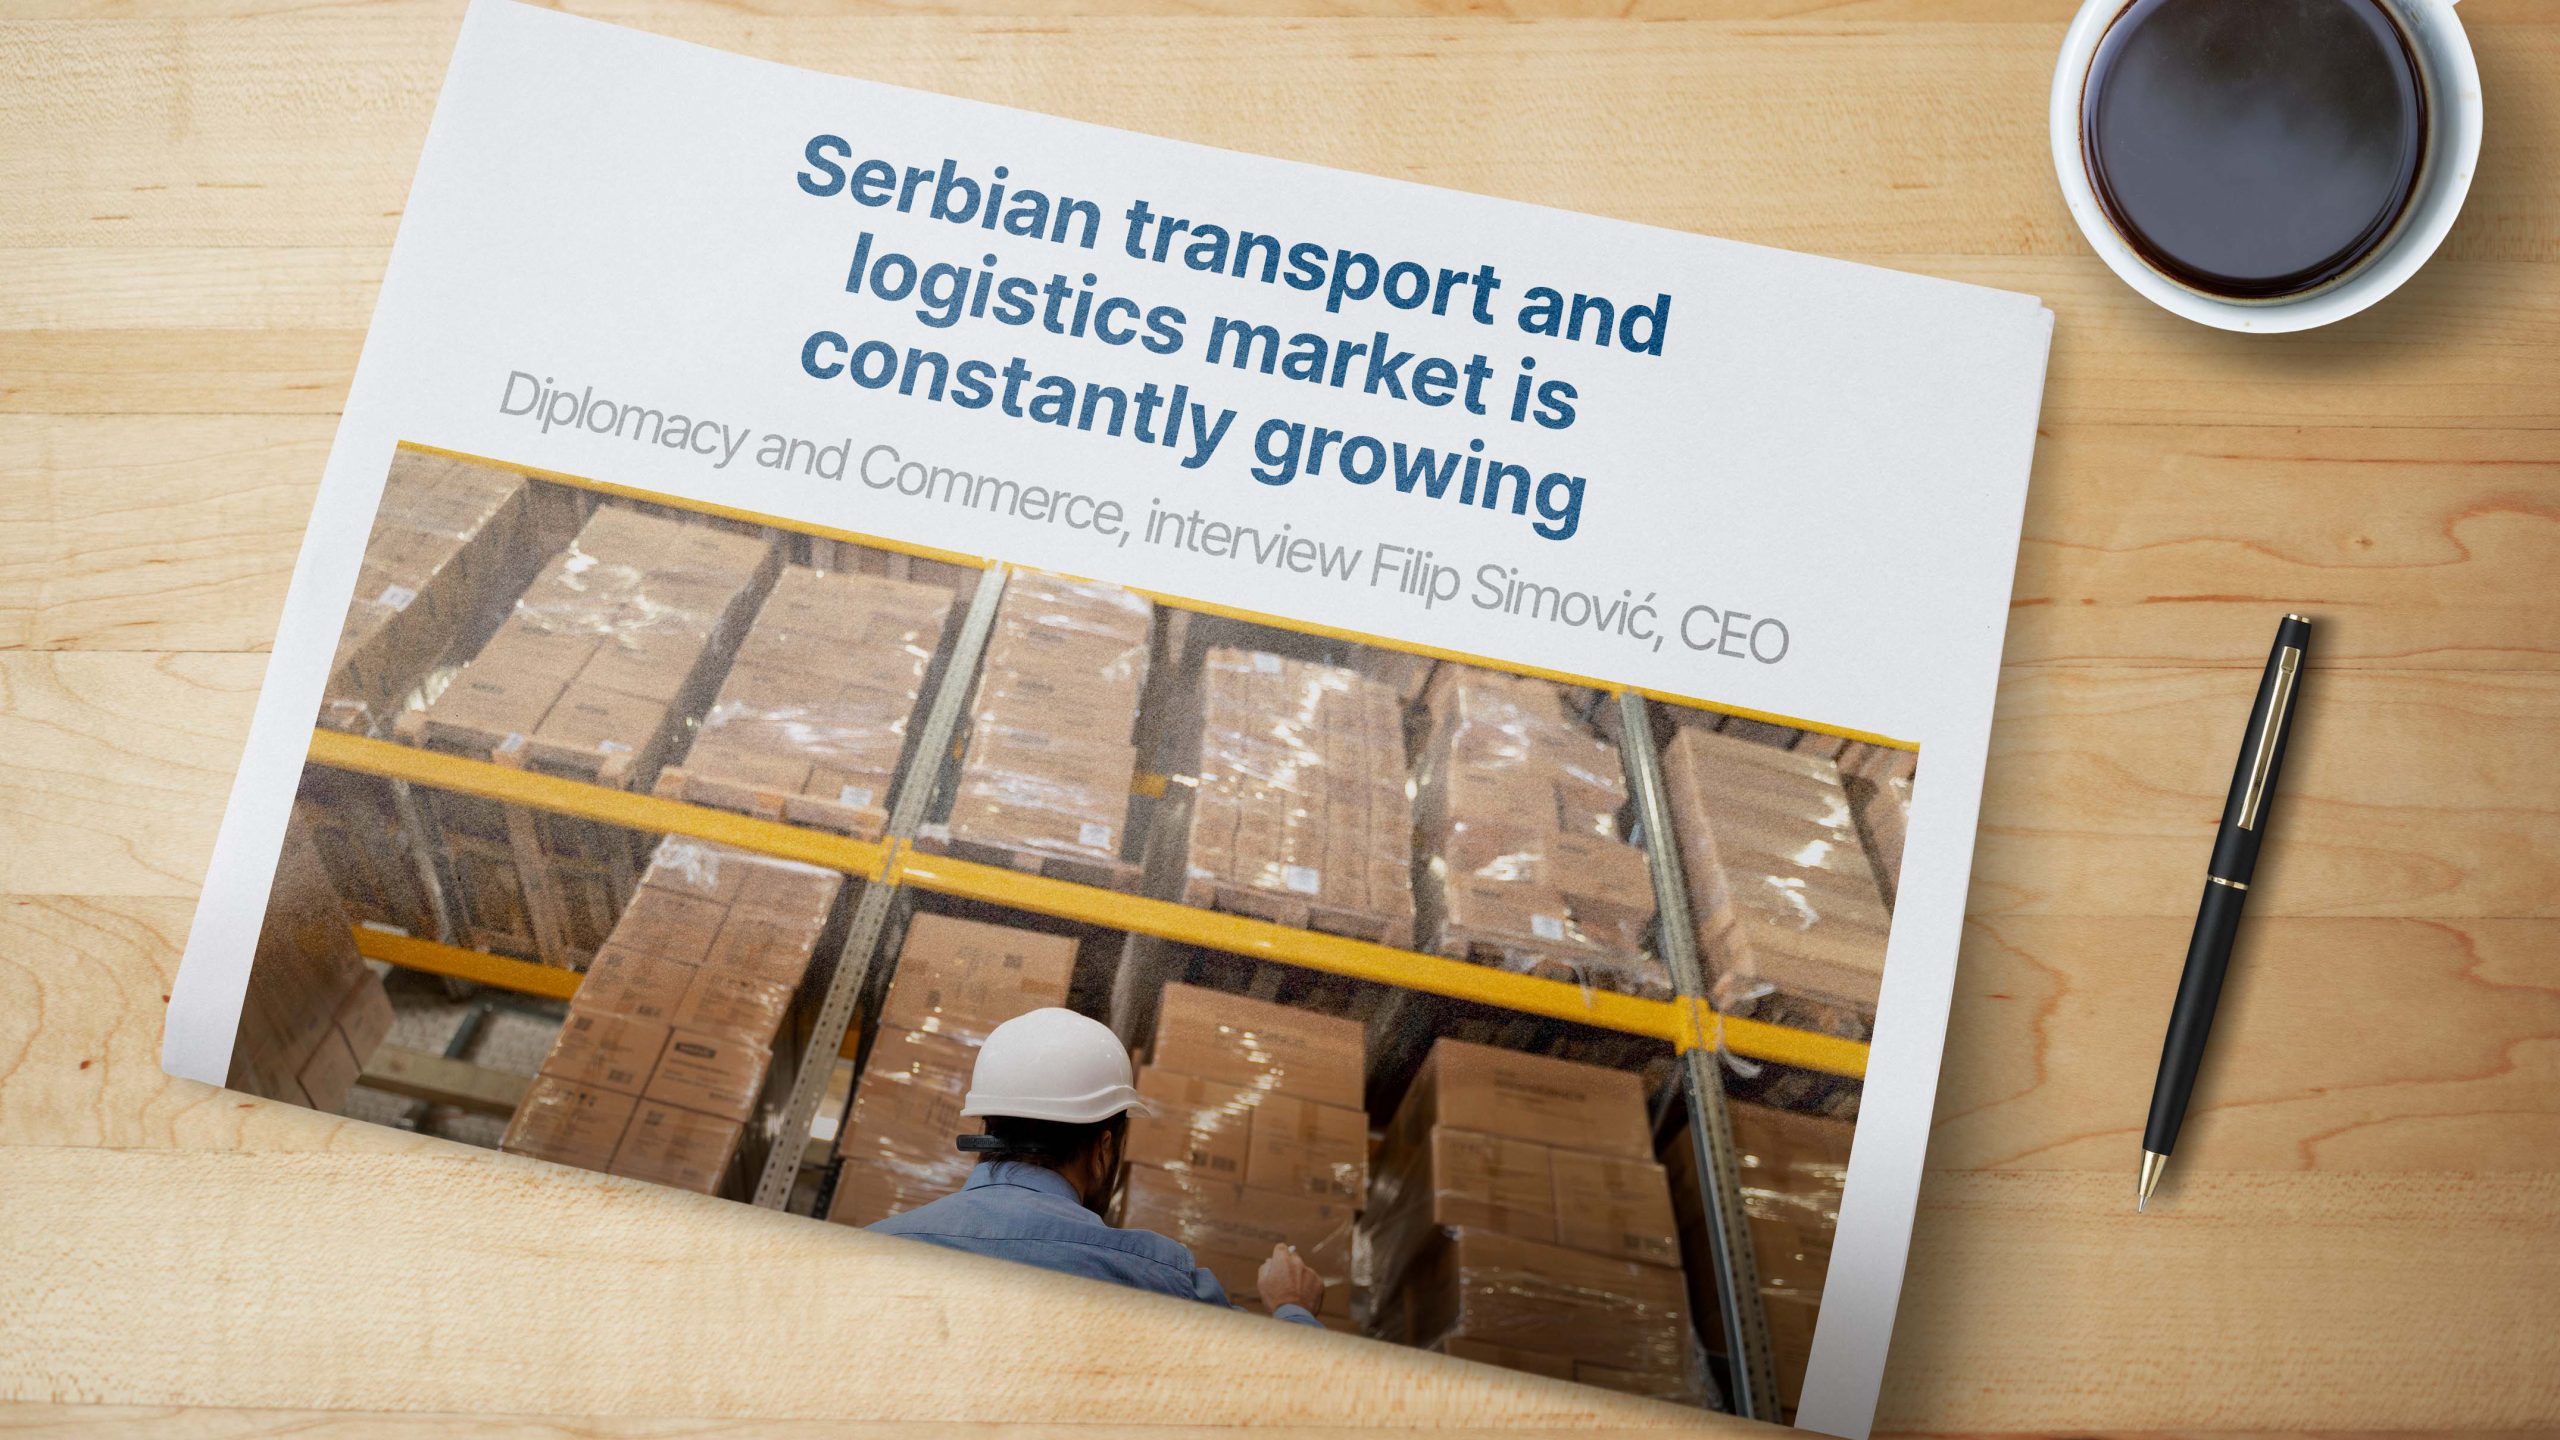 Serbian transport and logistics market is constantly growing